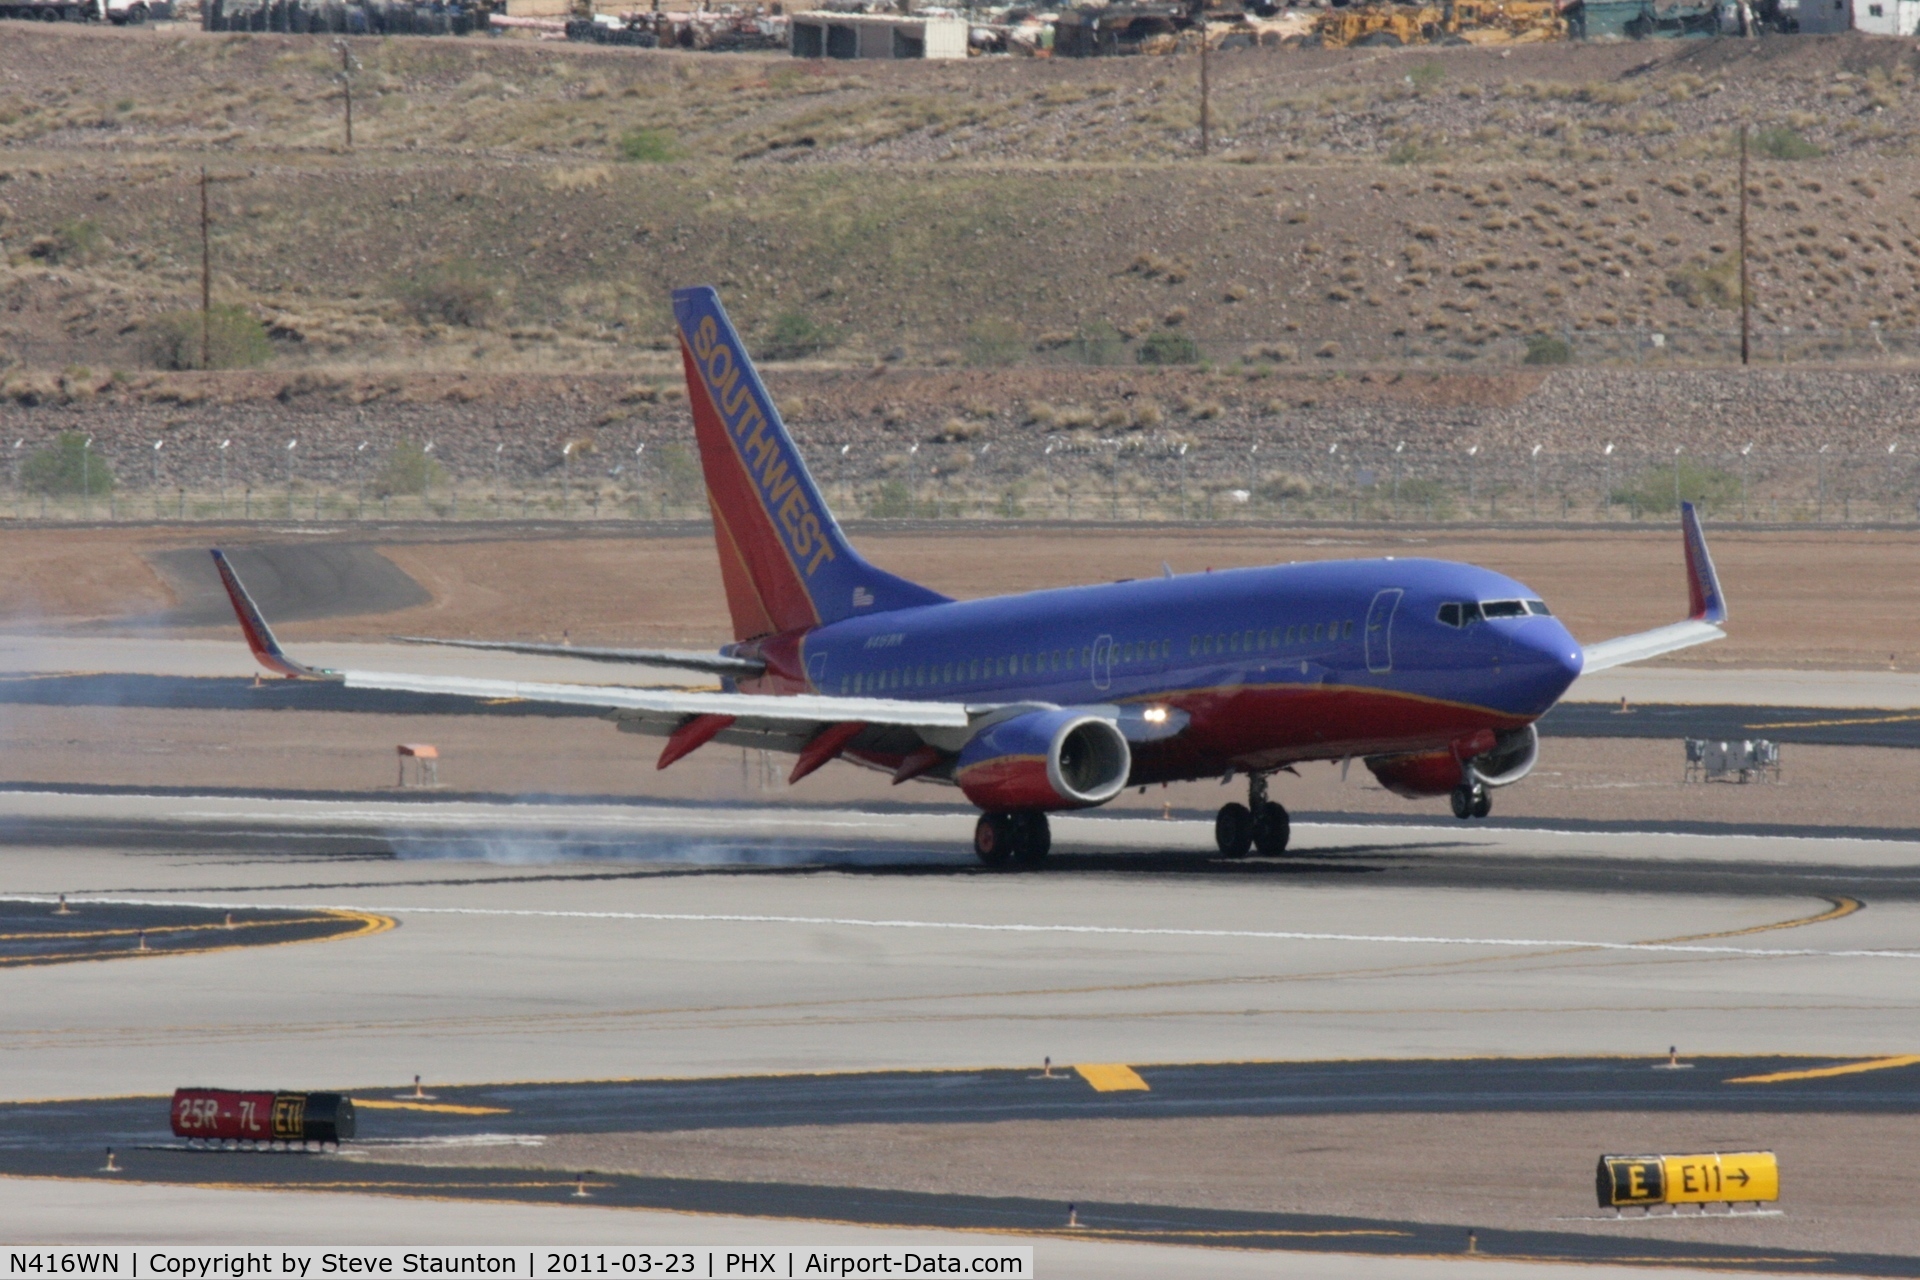 N416WN, 2001 Boeing 737-7H4 C/N 32453, Taken at Phoenix Sky Harbor Airport, in March 2011 whilst on an Aeroprint Aviation tour